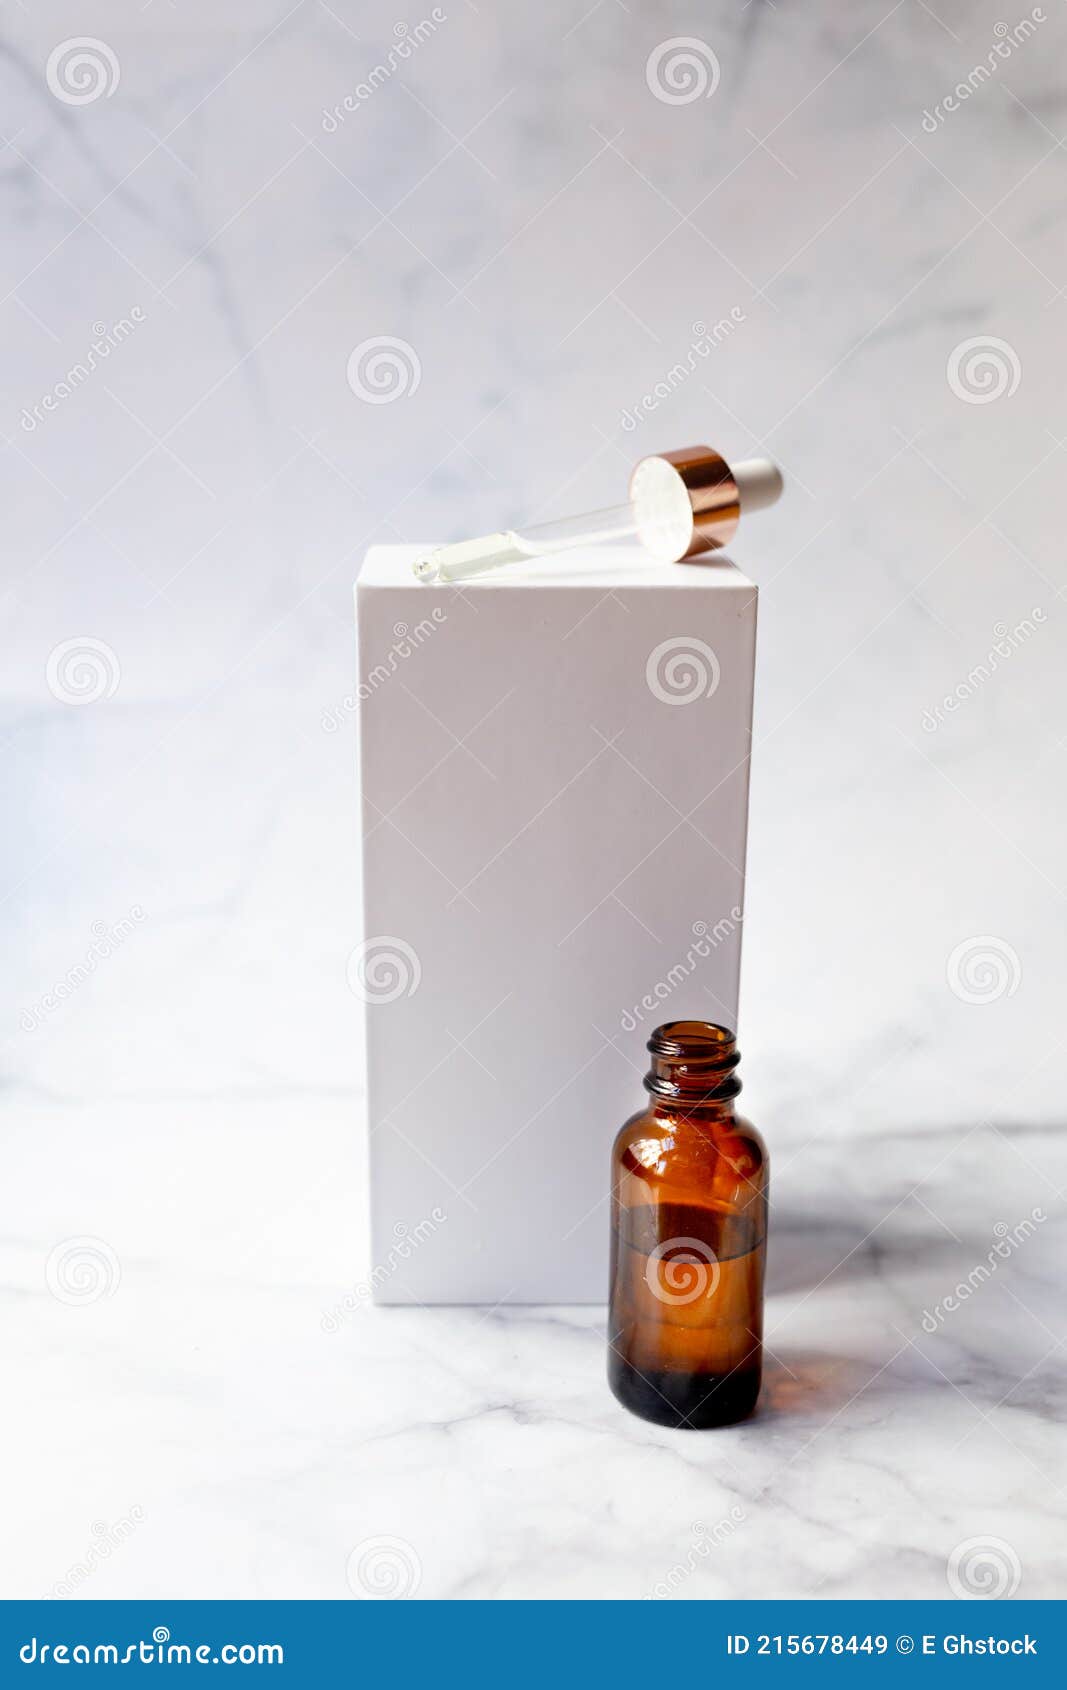 retinol oil serum oil bottle on  marble background. beauty care concept